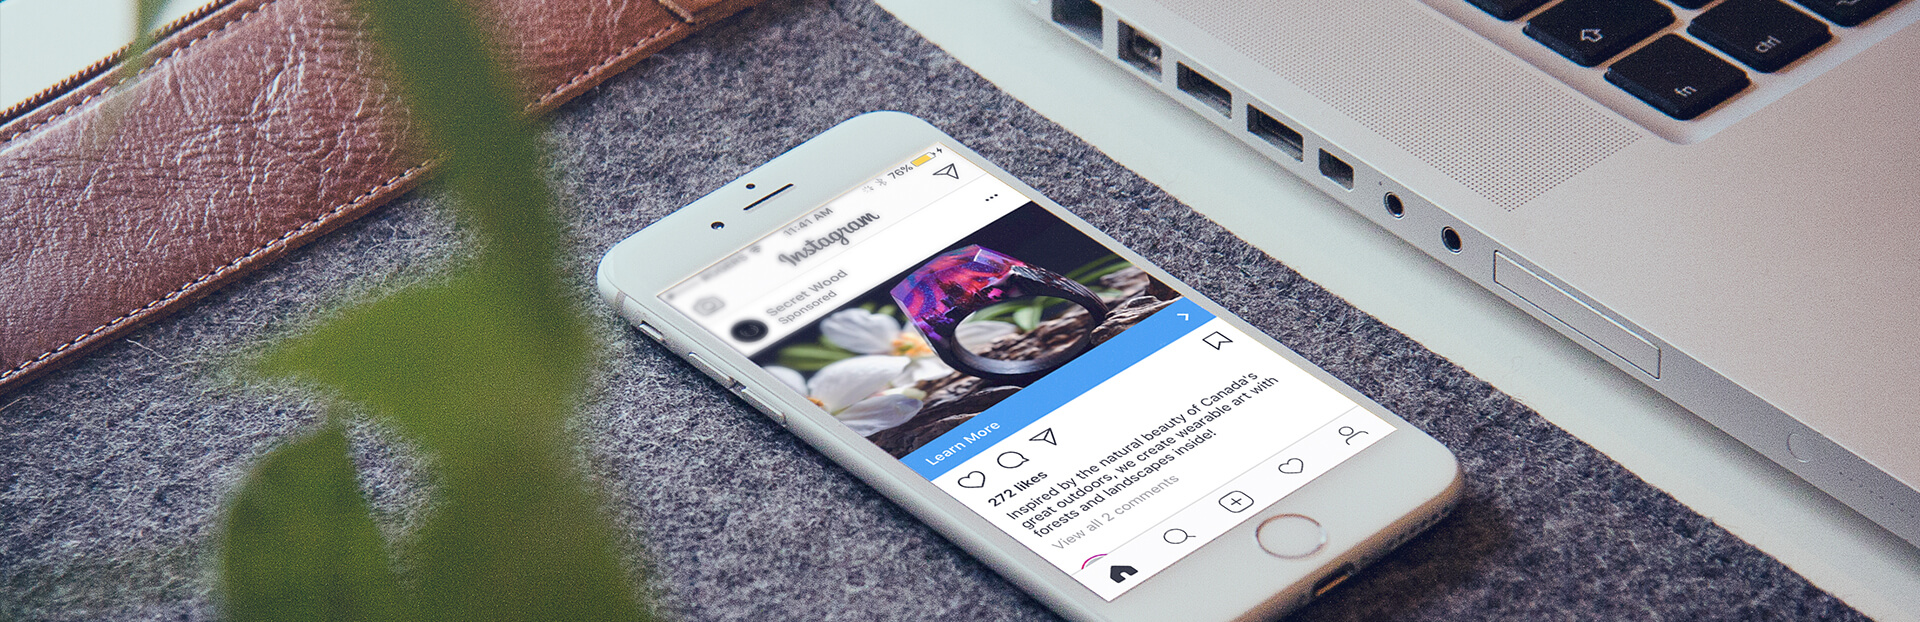 Instagram Reach Report open on a mobile device